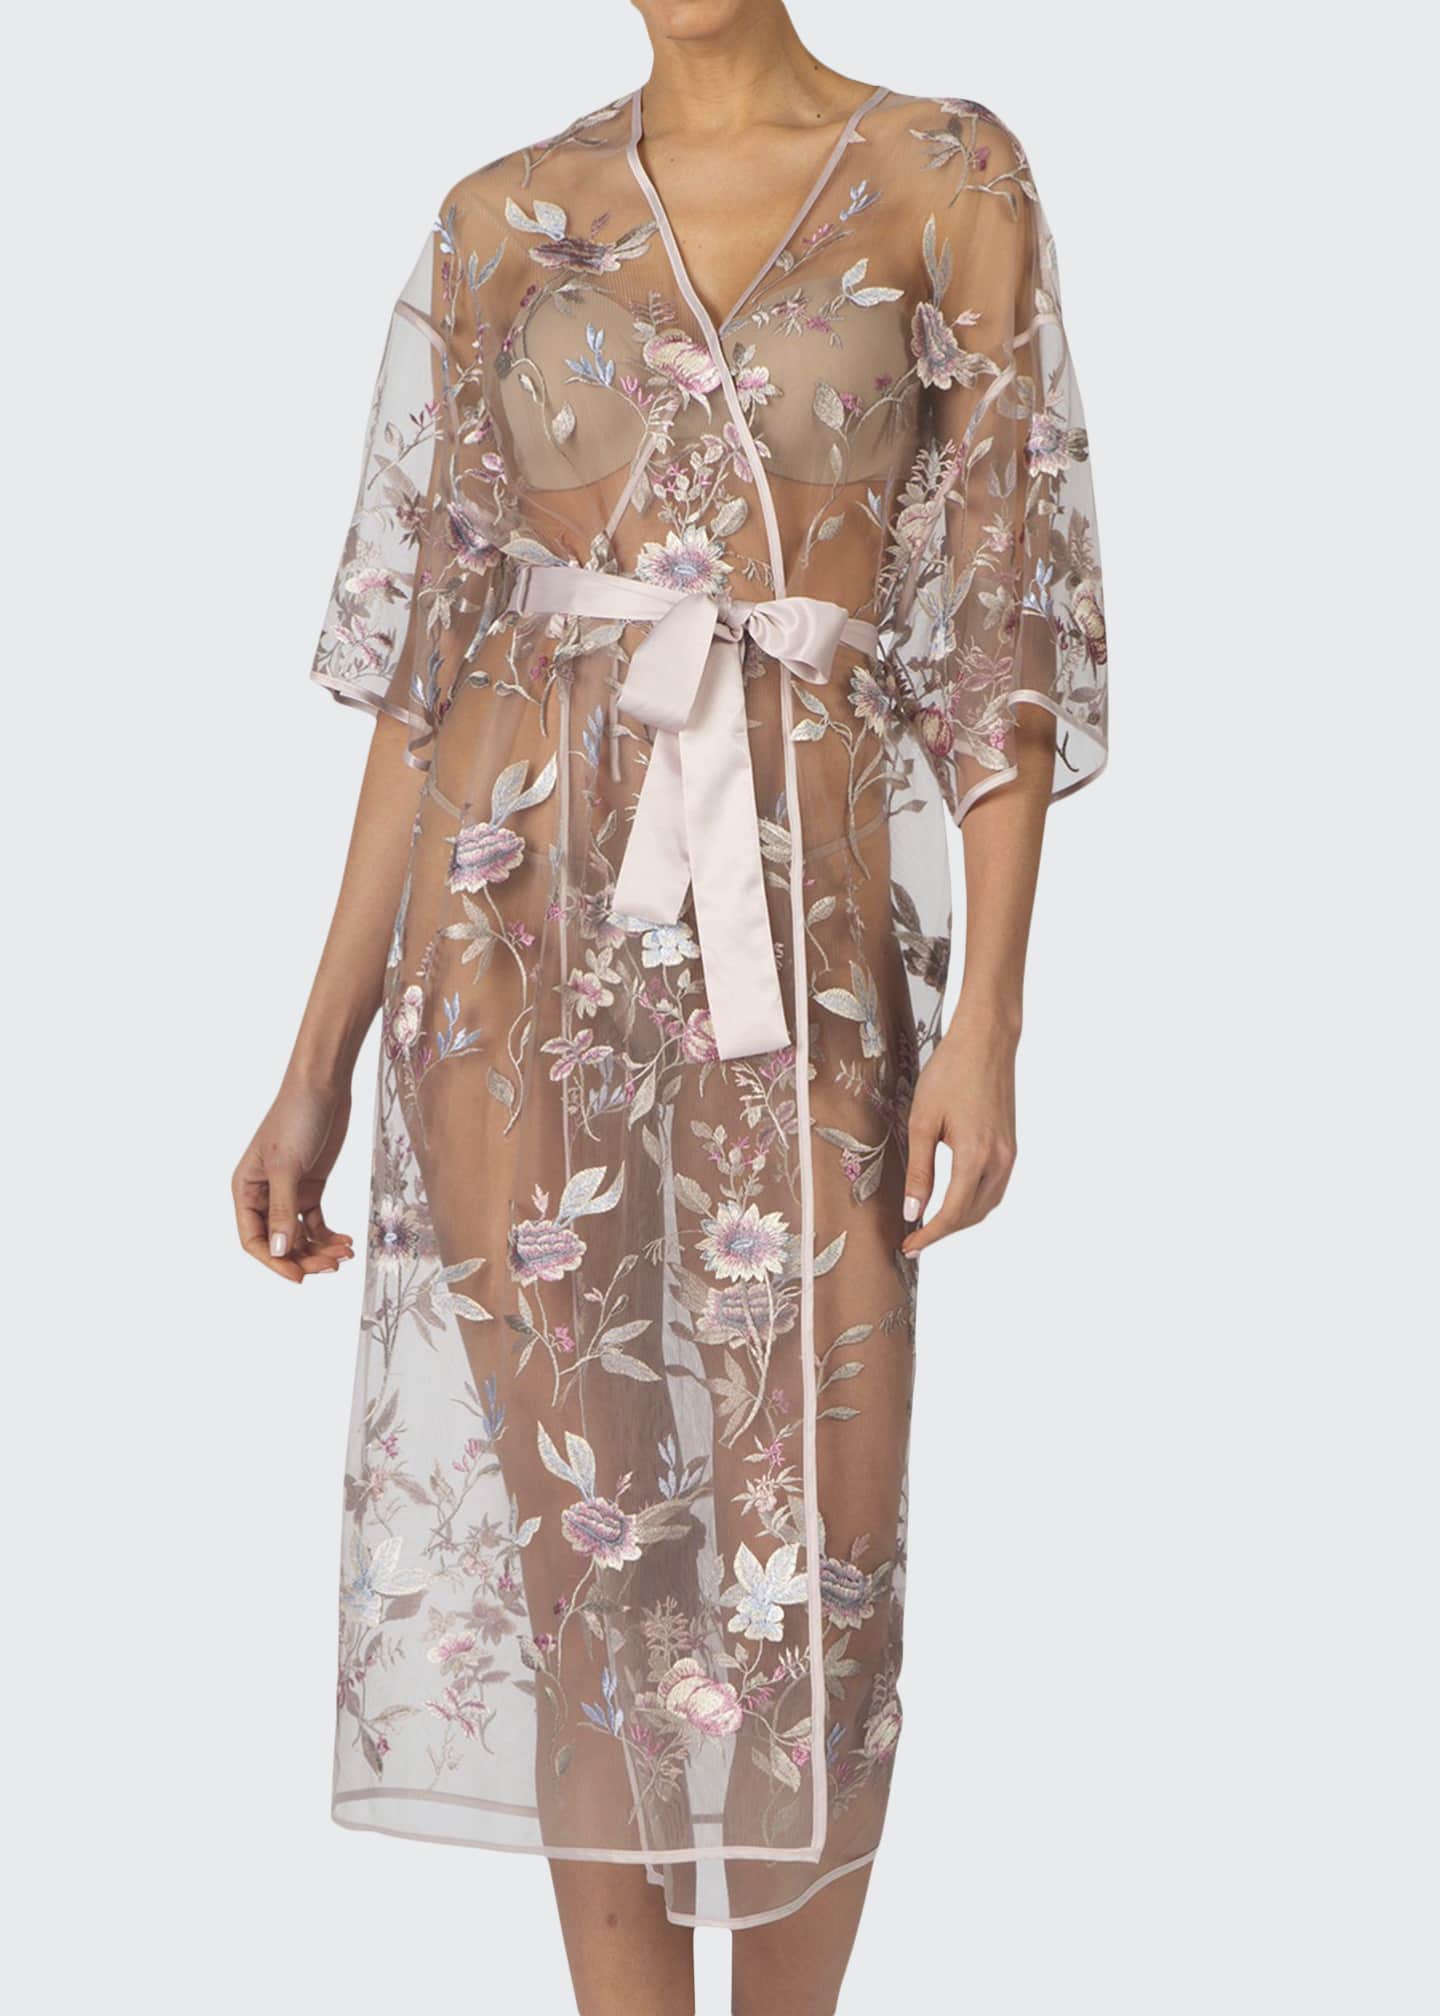 Rya Collection Stunning Floral Embroidered Sheer Robe Bergdorf Goodman